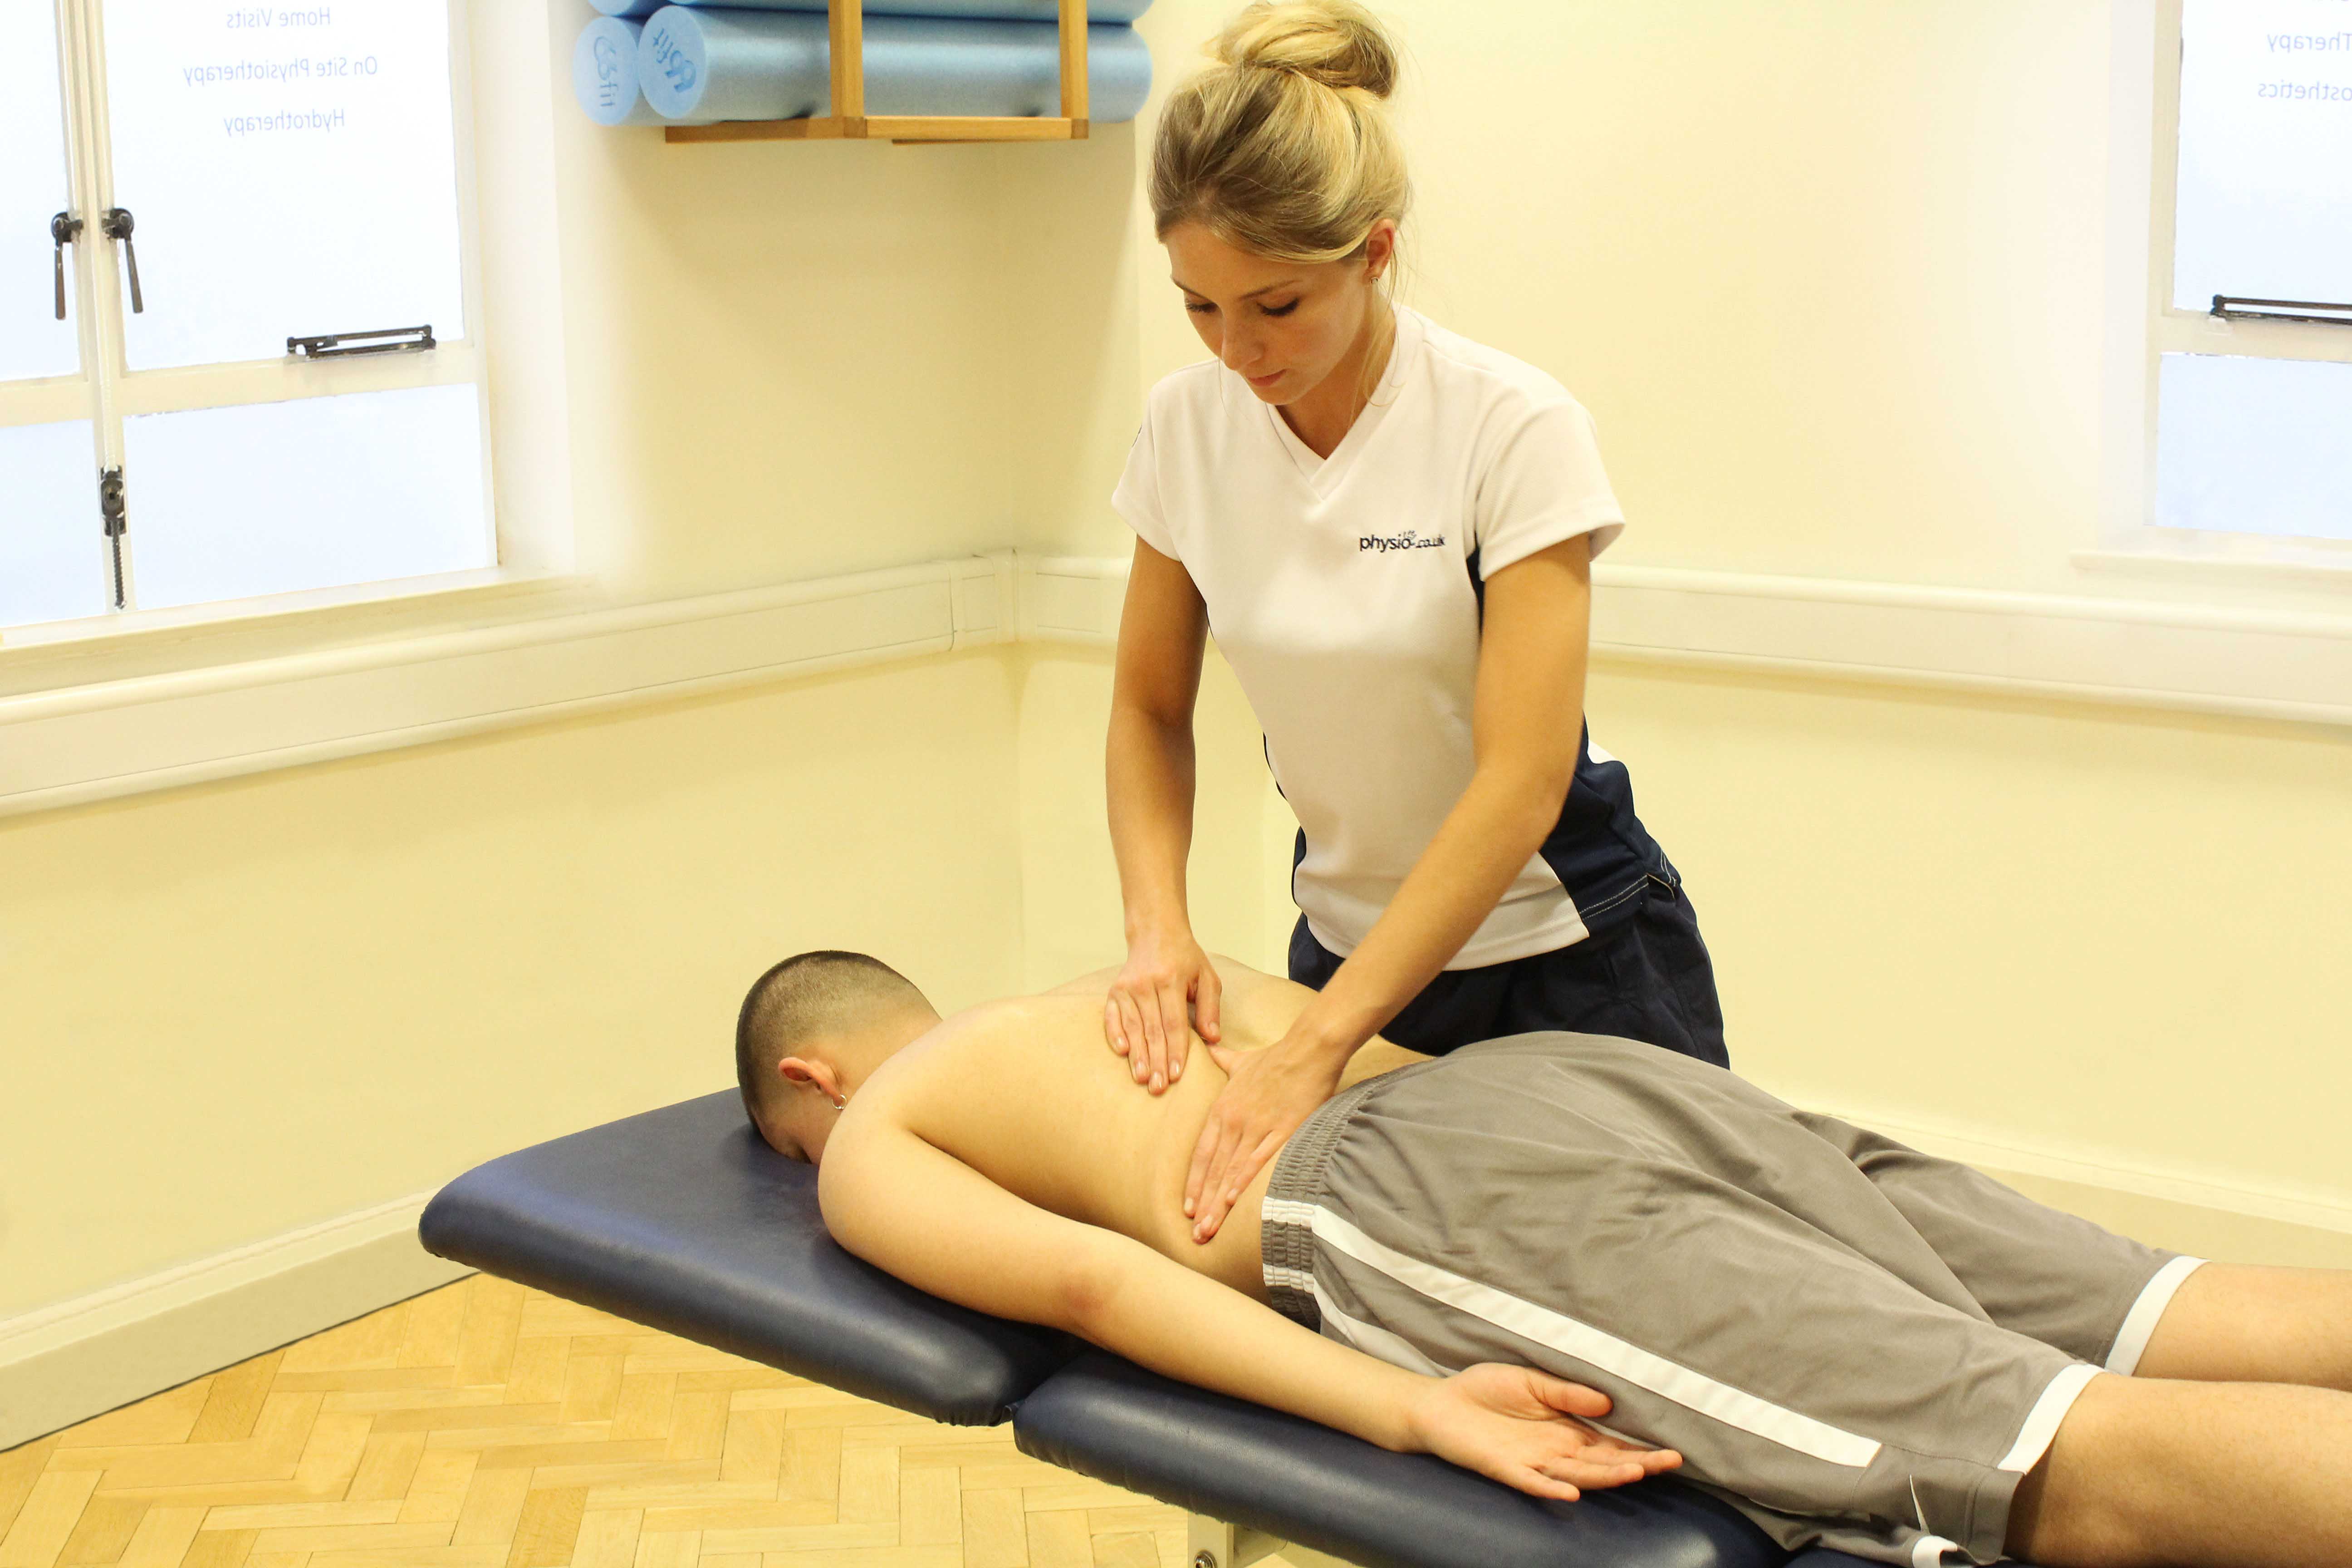 Soft tissue massage of the upper arms and shoulders following exercise to reduce muscle soreness